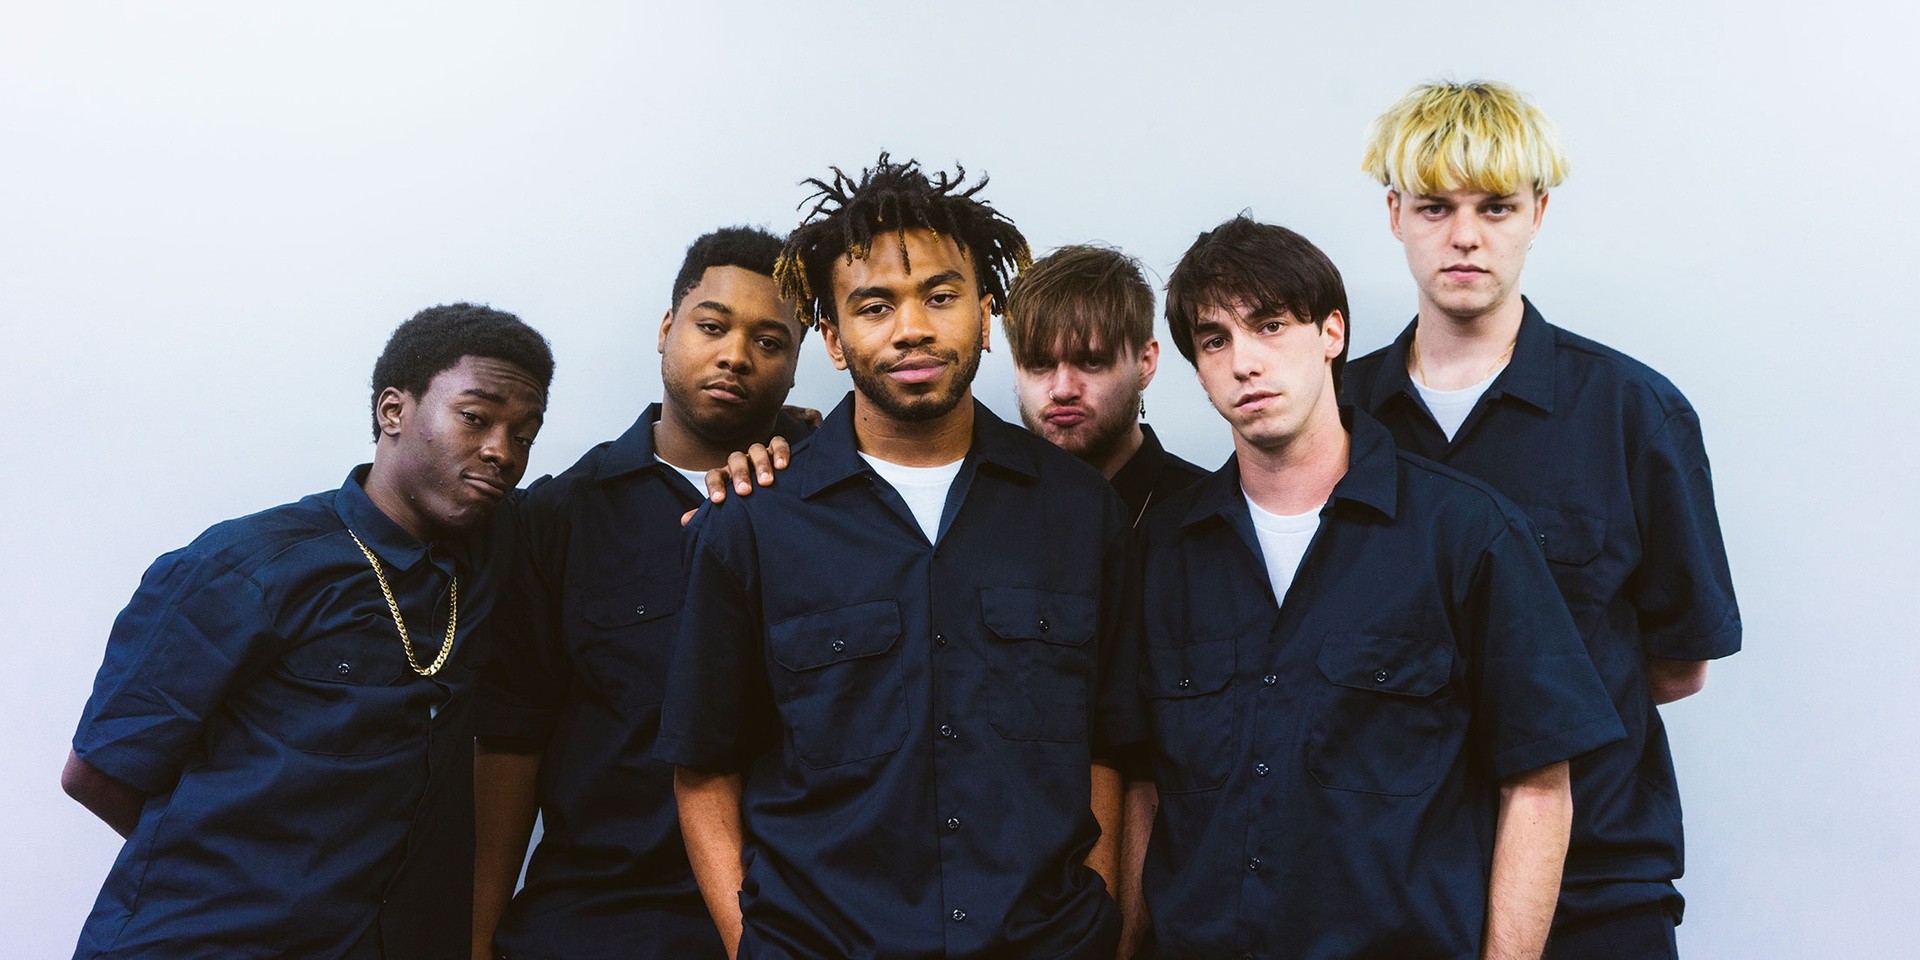 BROCKHAMPTON's new album GINGER is out now